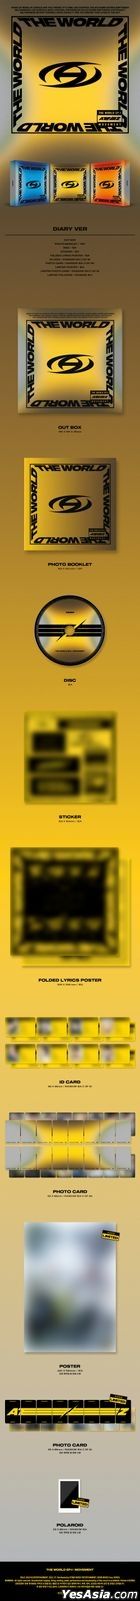 ATEEZ - THE WORLD EP.1 : MOVEMENT (DIARY Version) + Poster in Tube (DIARY Version)